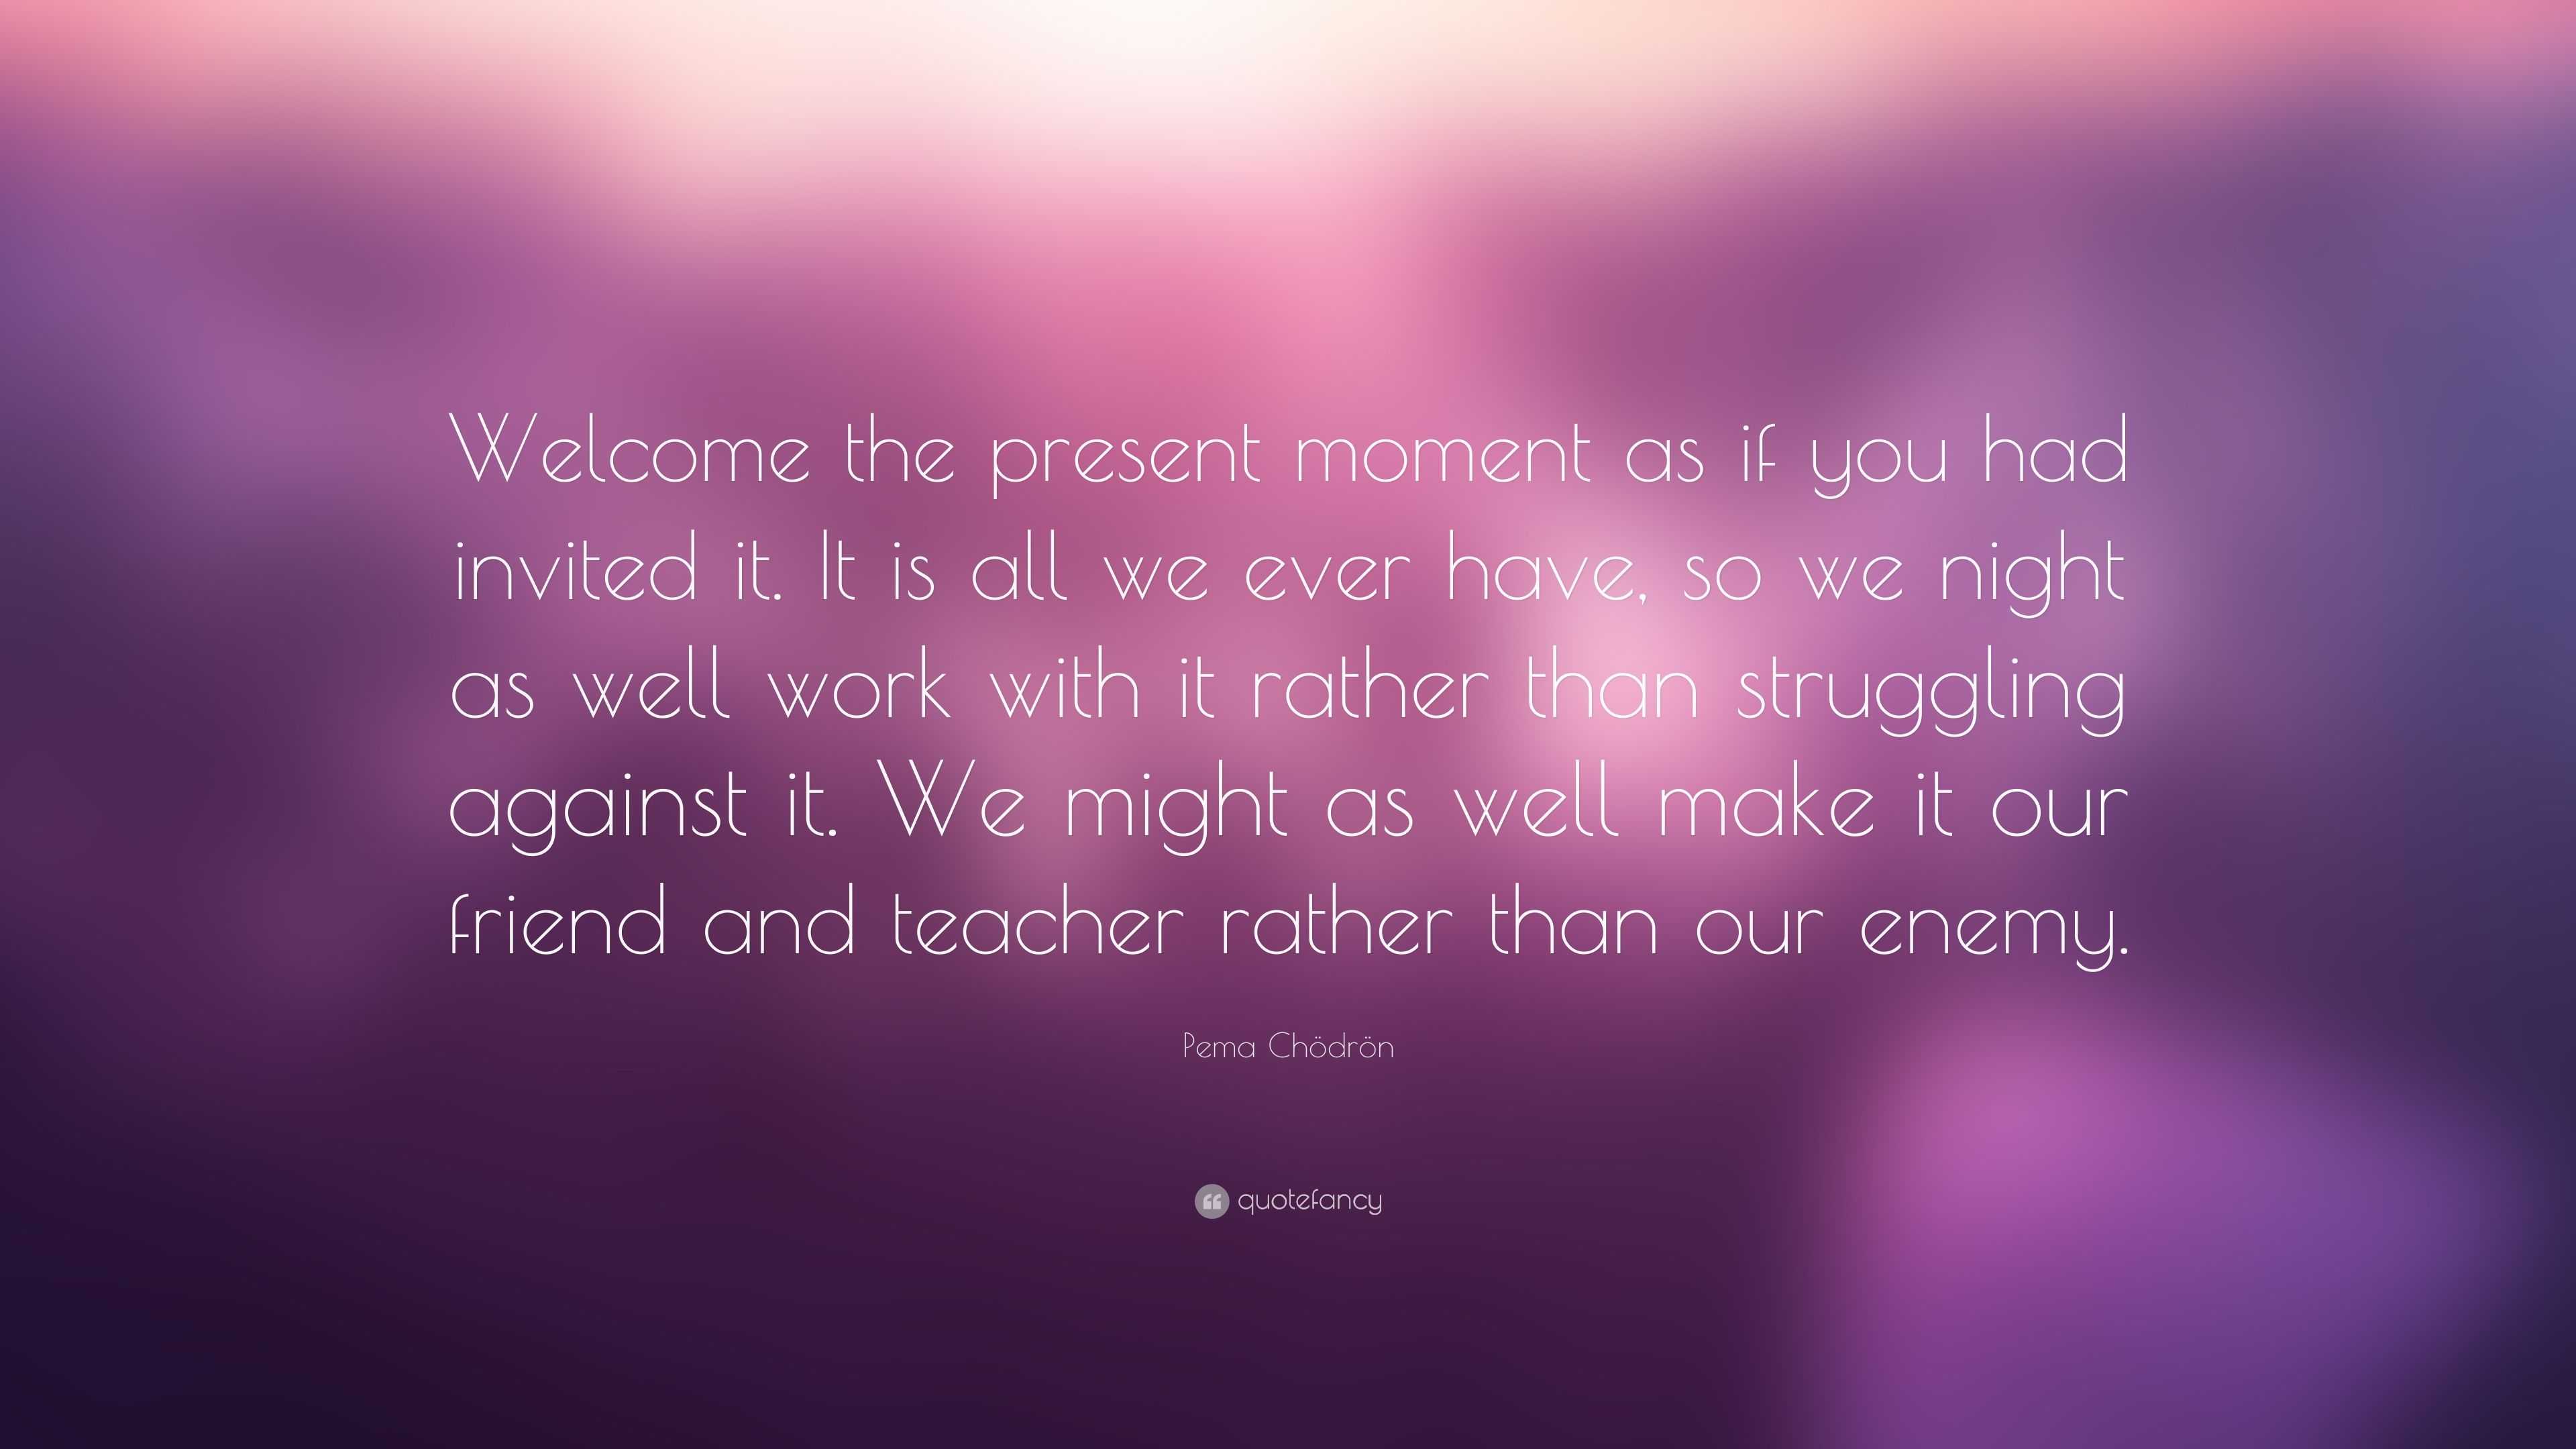 Pema Chödrön Quote: “Welcome the present moment as if you had invited ...